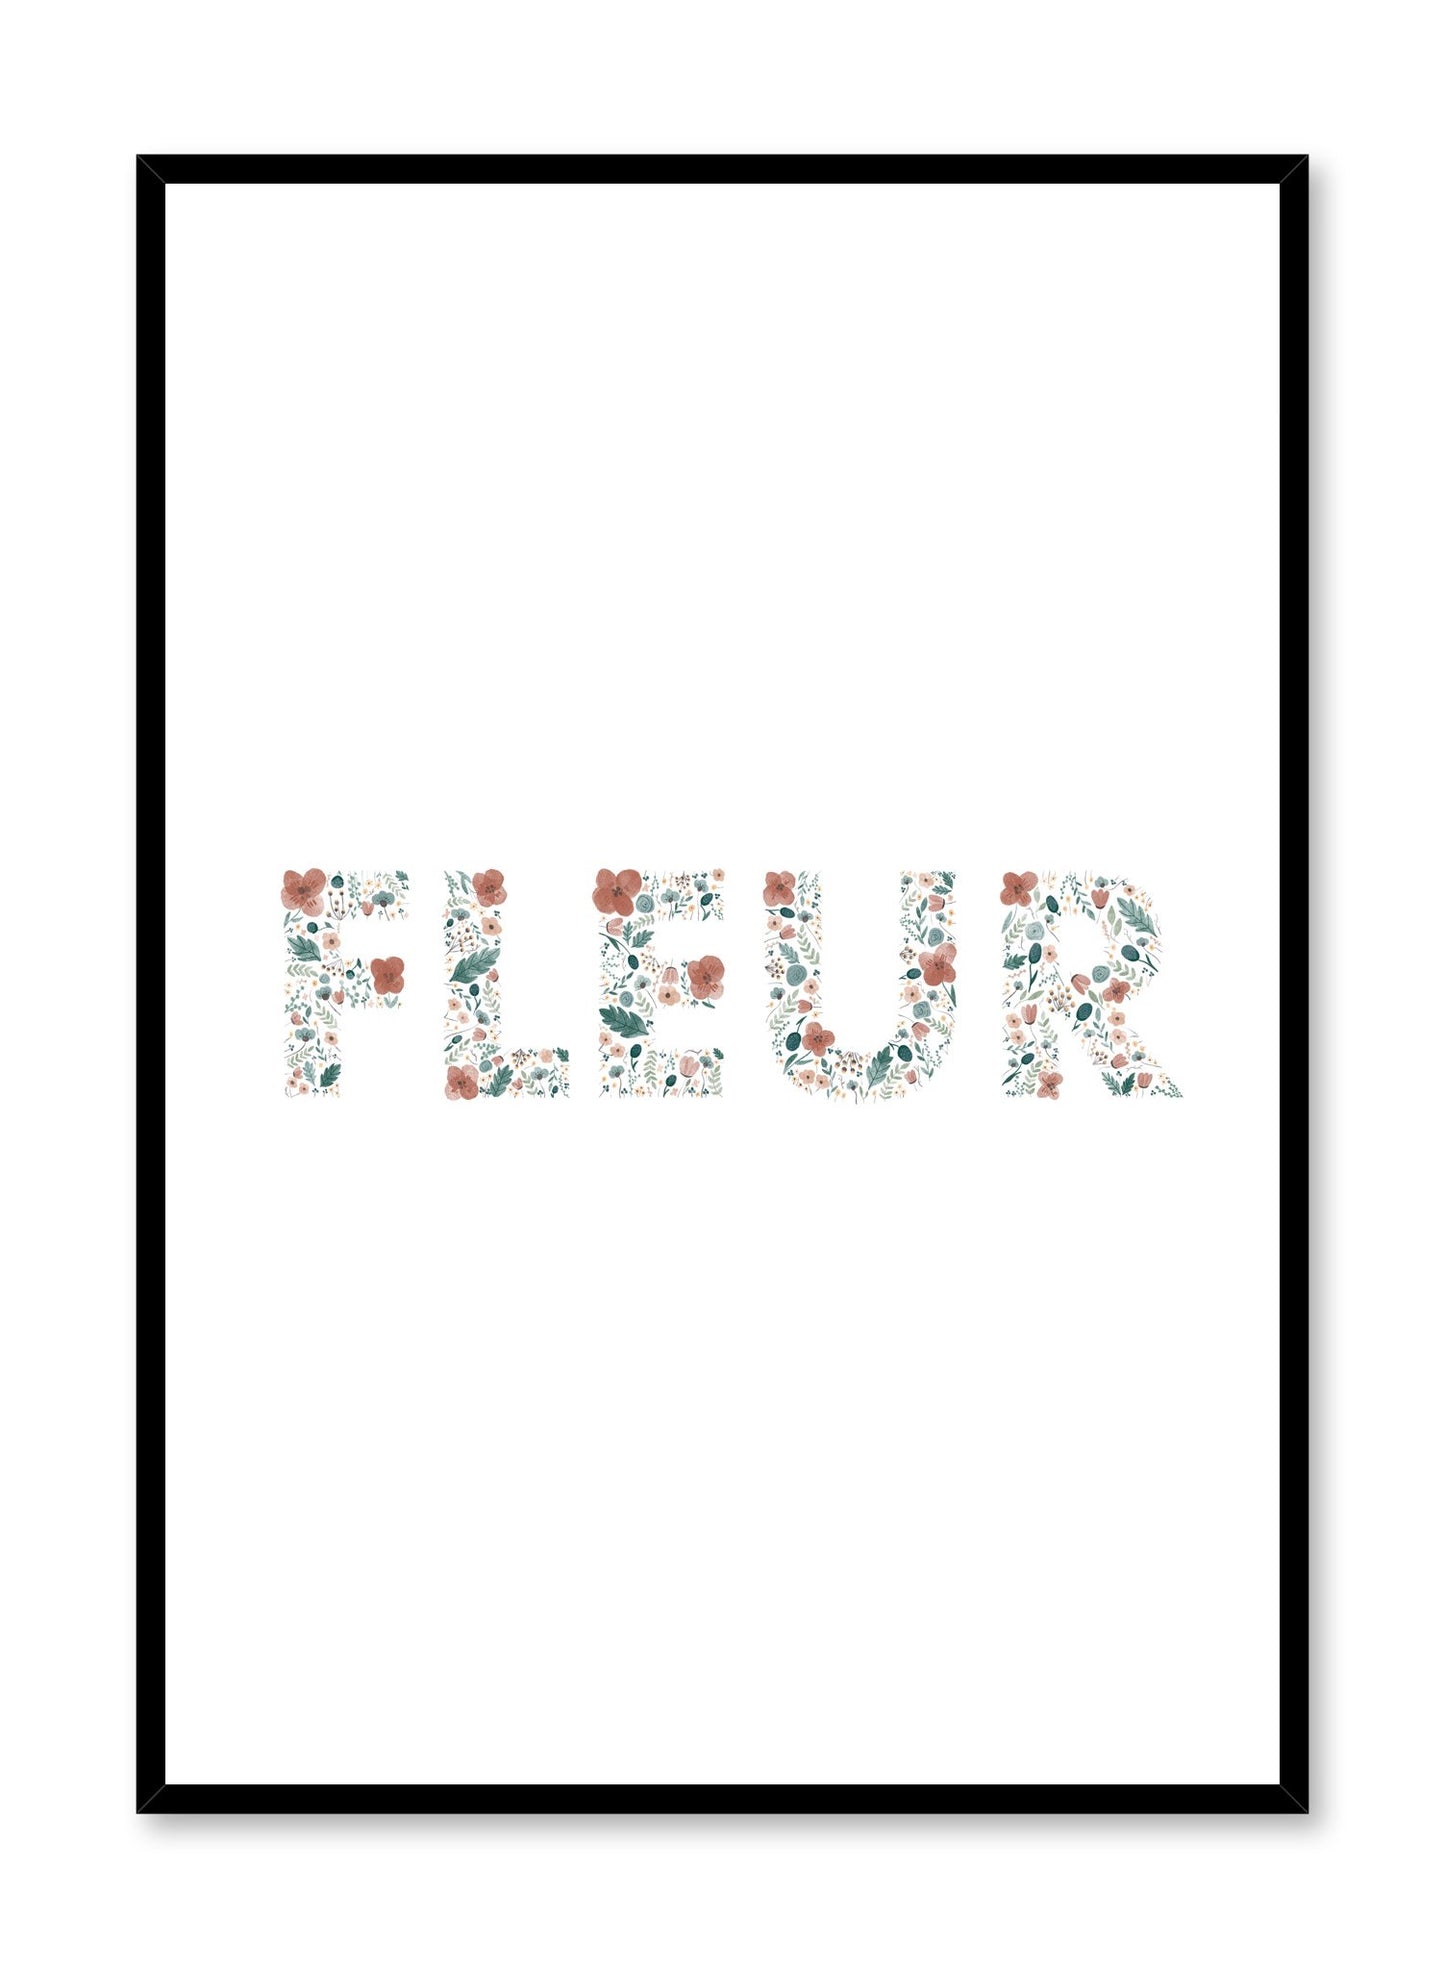 Modern minimalist floral typography poster by Opposite Wall with Fleur lettering